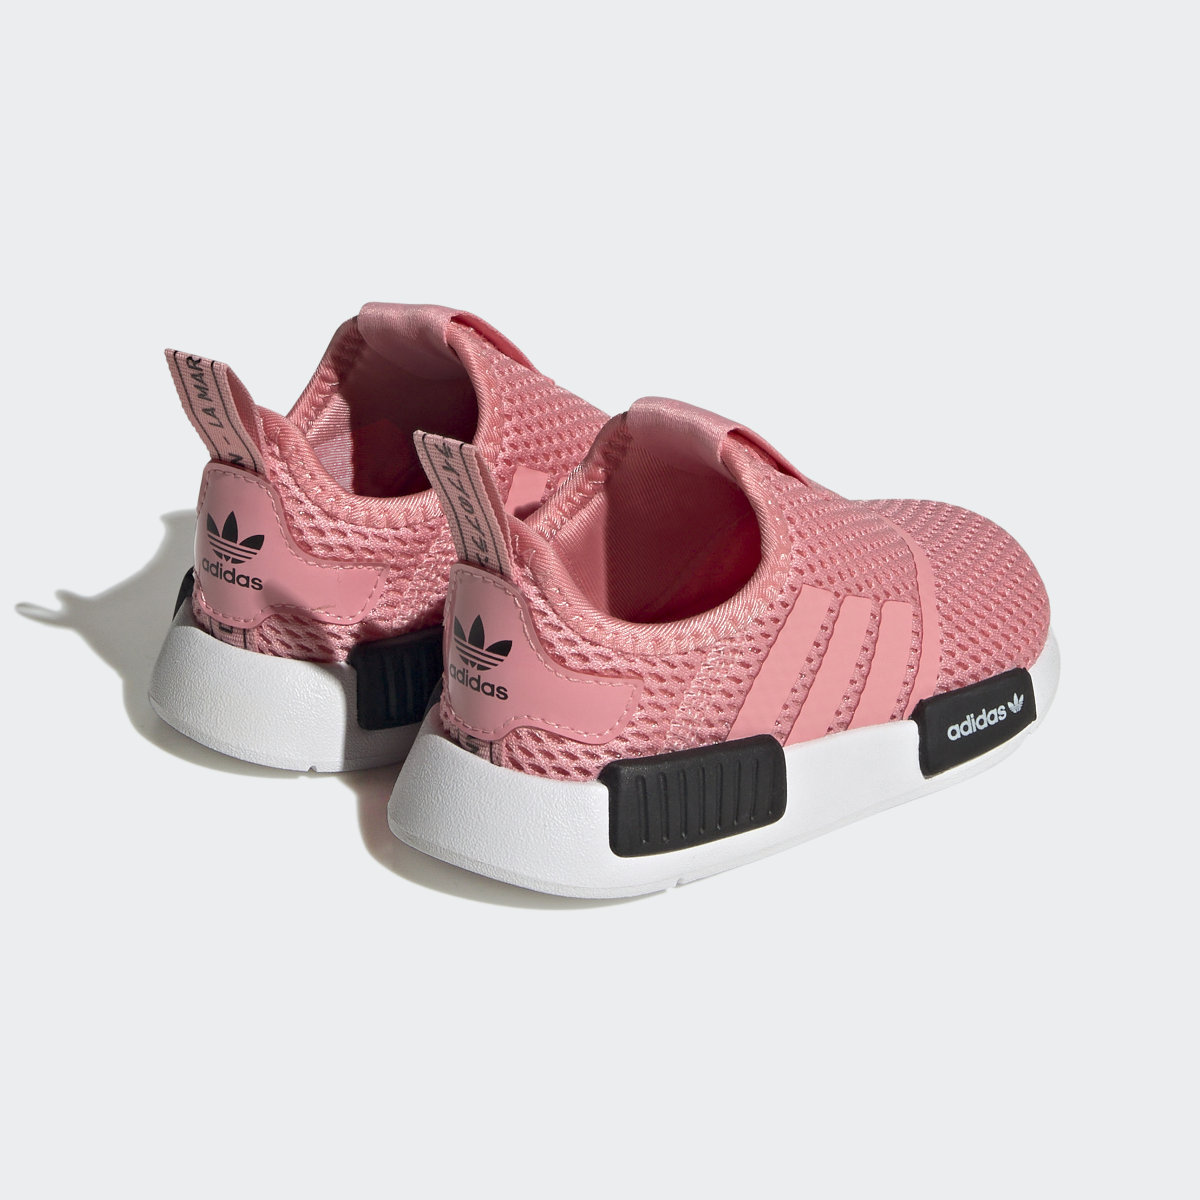 Adidas NMD 360 Shoes. 6